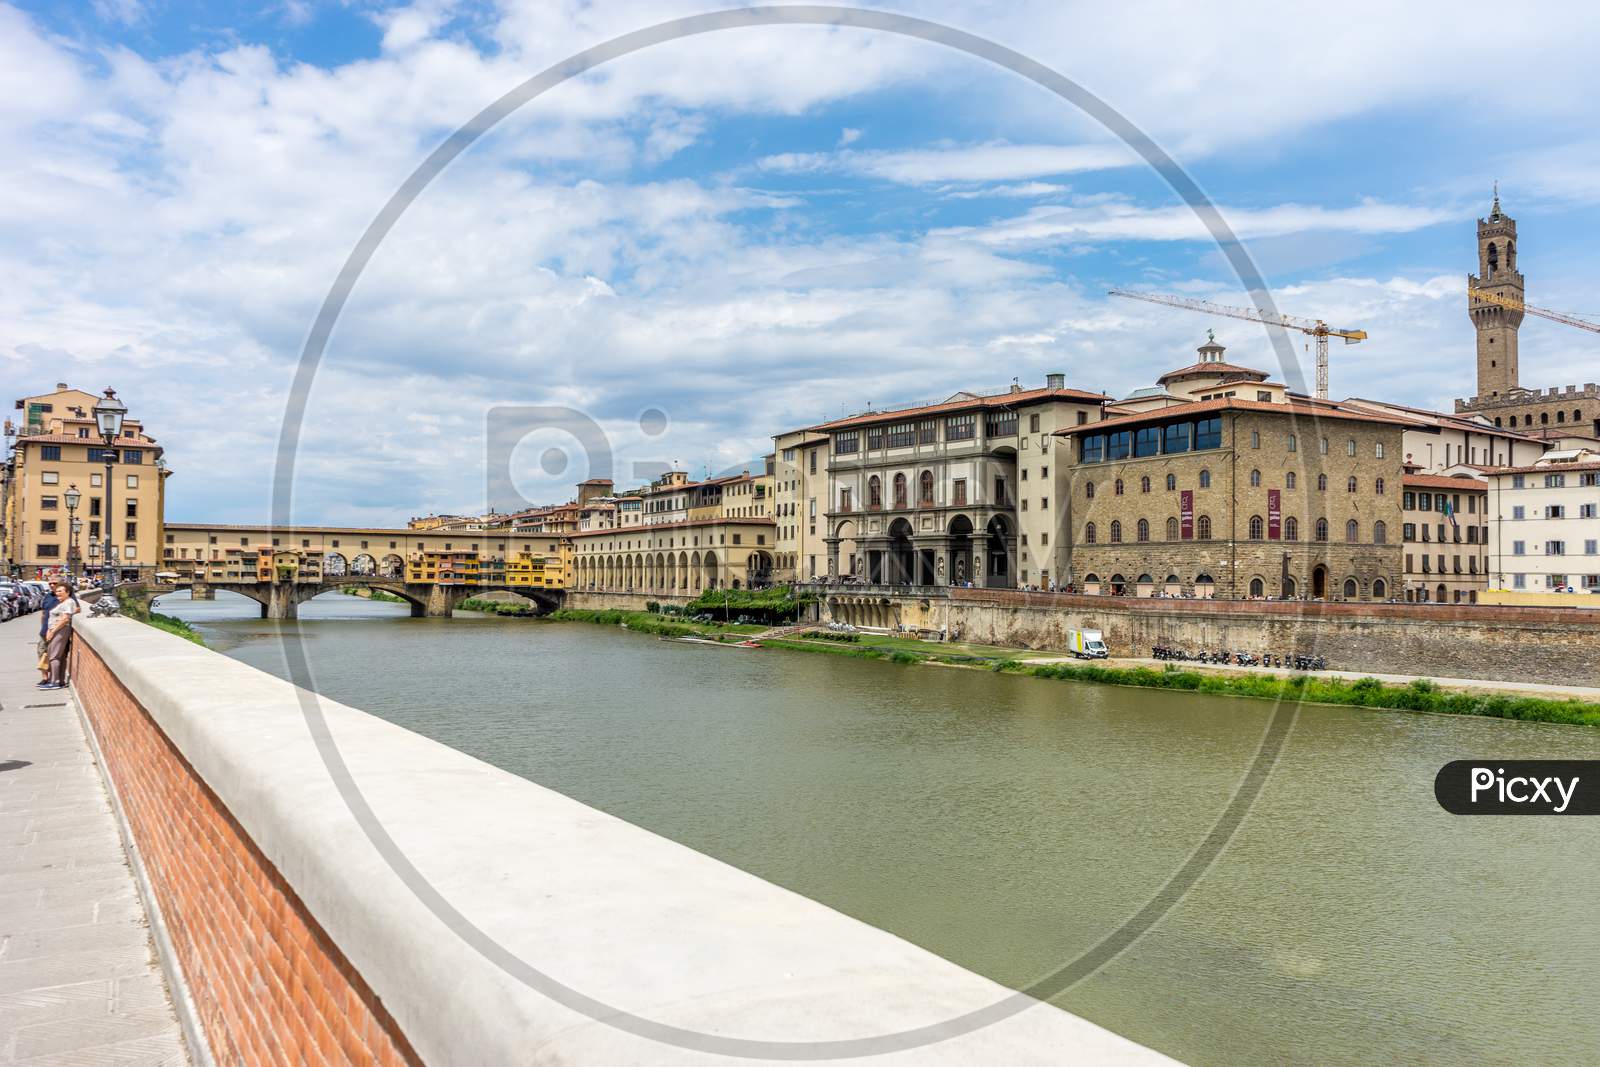 Florence, Italy - 25 June 2018: Tourists Walking Near The Ponte Vecchio Over The Arno River In Florence, Italy